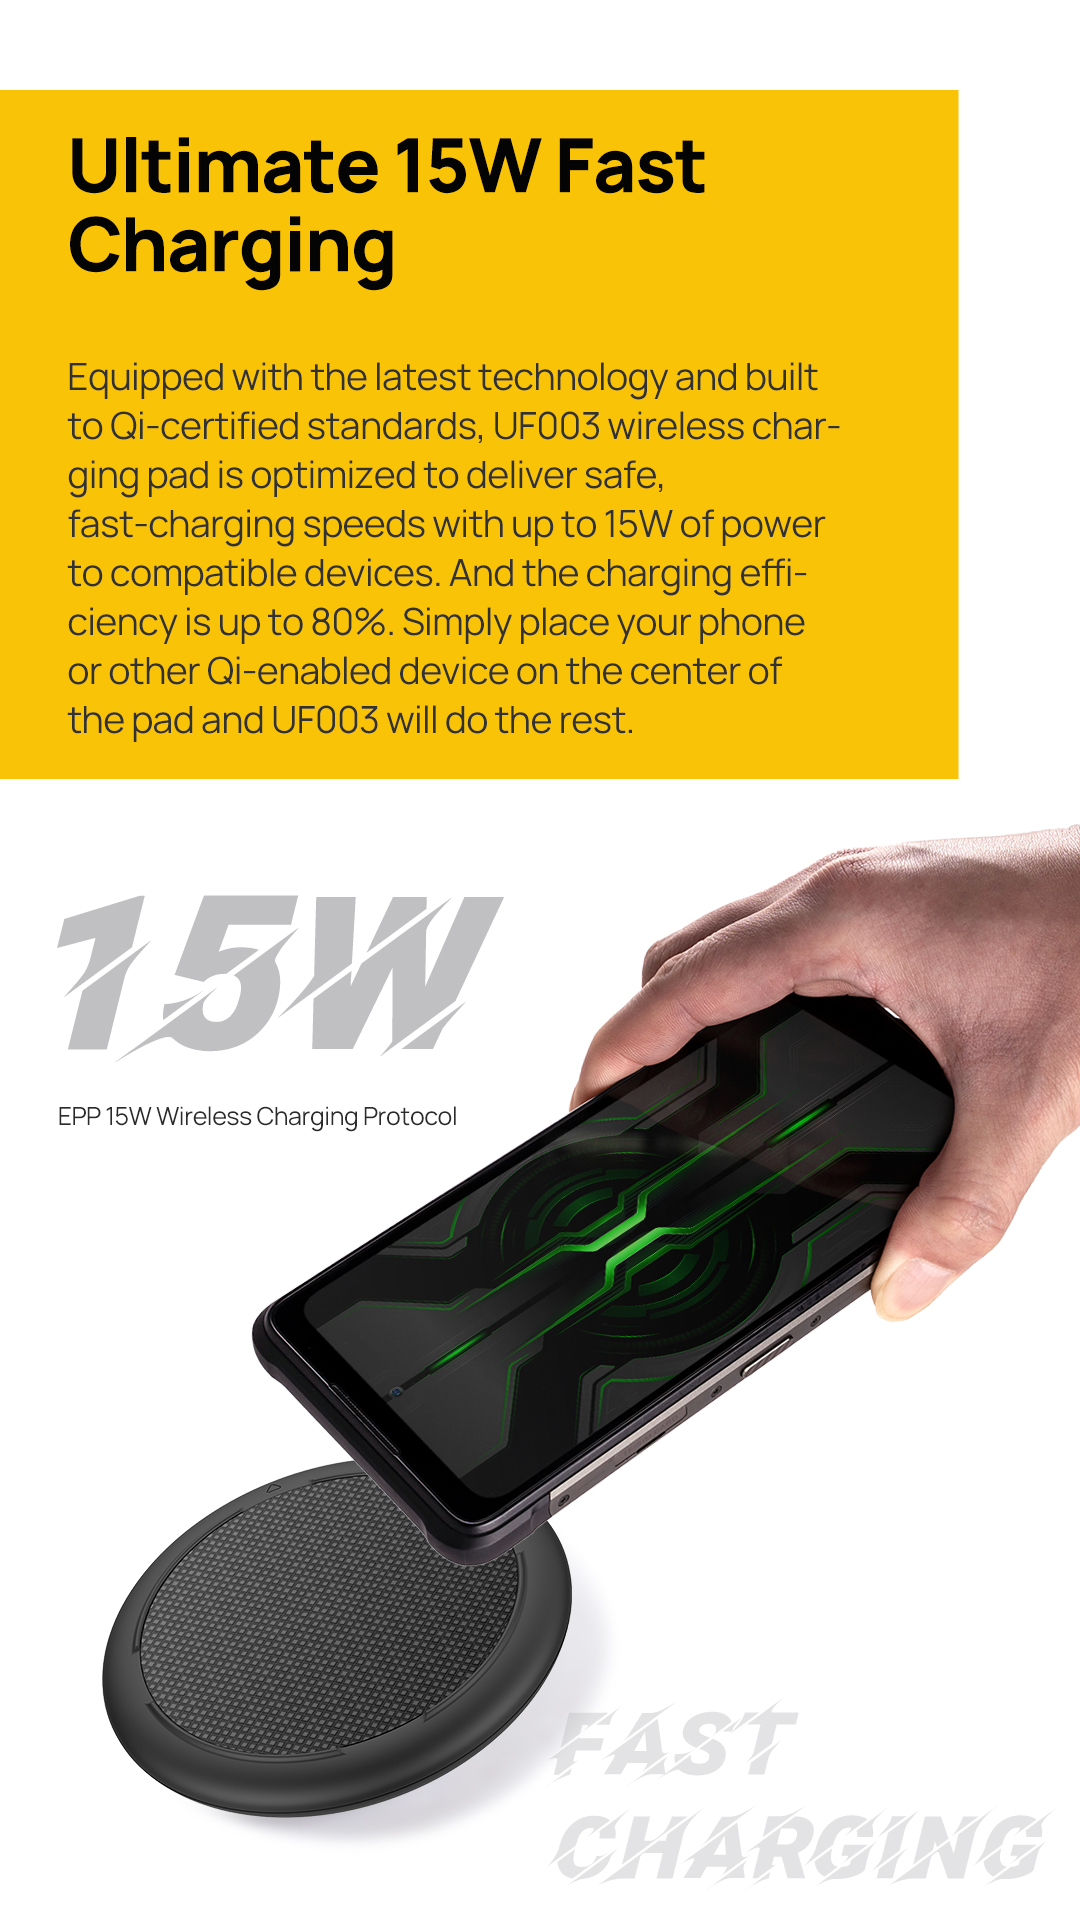 Ulefone-UF003-EPP-15W-Wireless-Charger-Quick-Charging-Pad-For-Ulefone-Armor-10-5G-For-iPhone-12-Pro--1818277-2